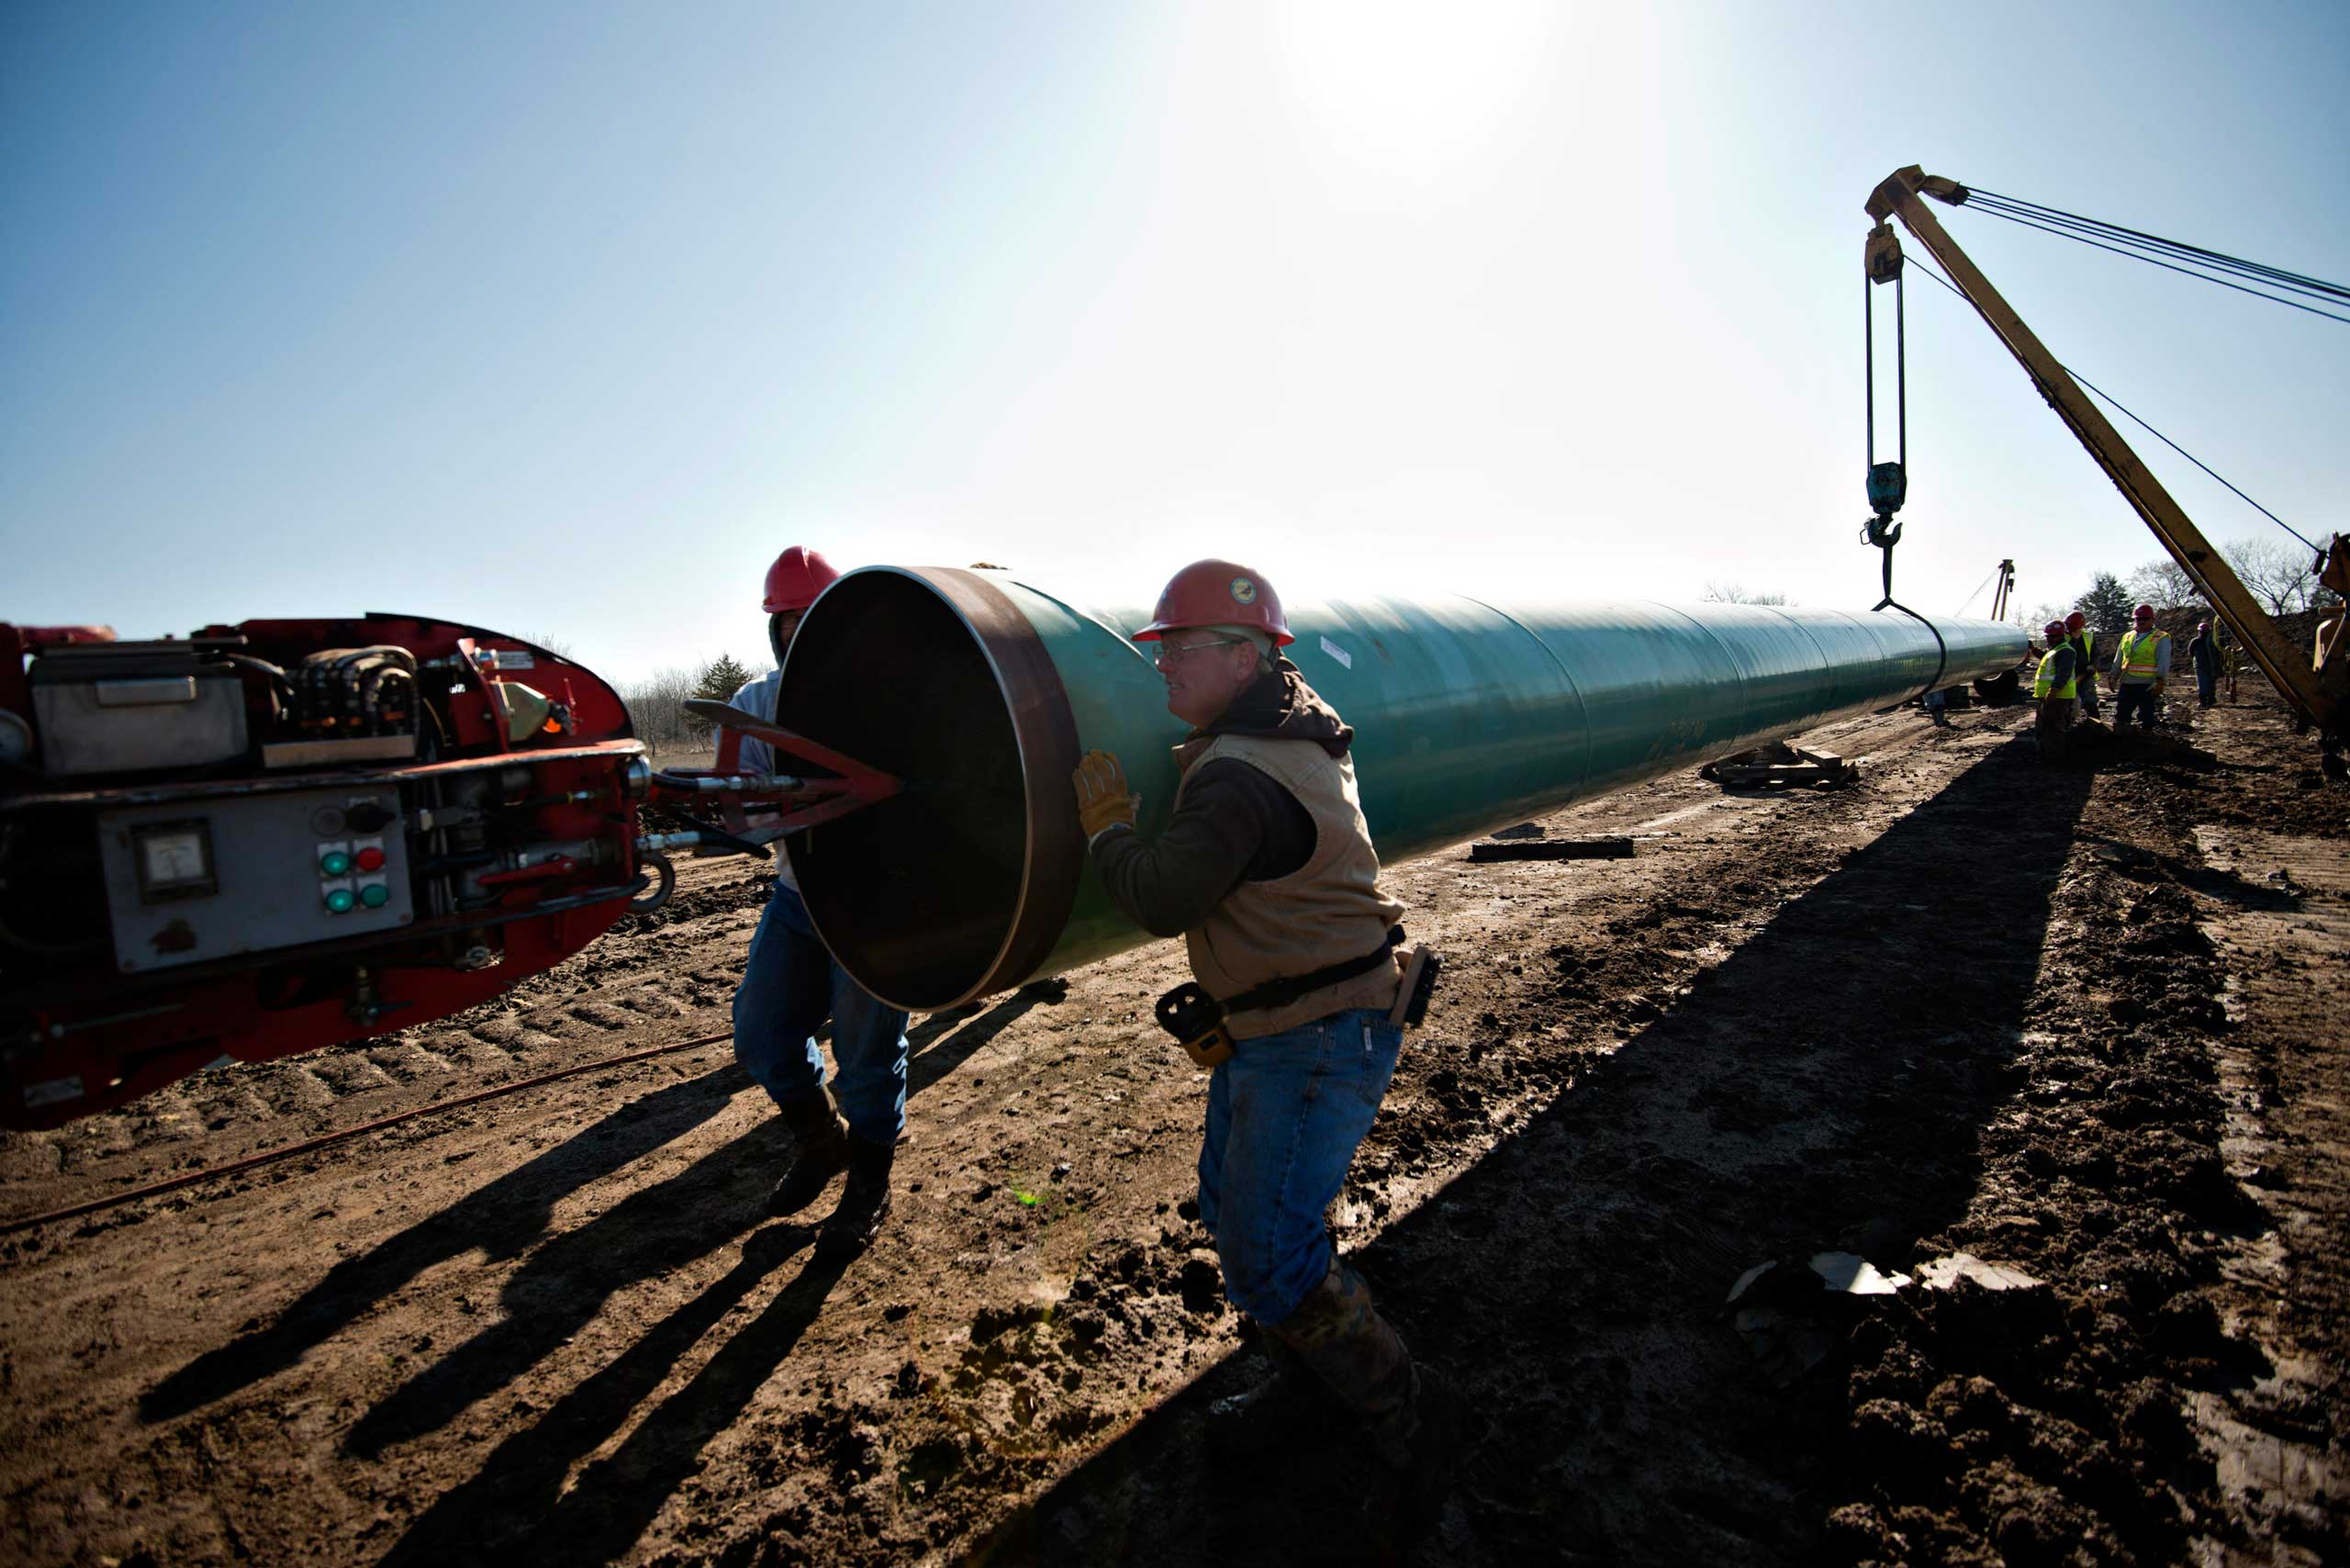 Workers move a section of pipe during construction of the Gulf Coast Project pipeline, part of the Keystone XL Pipeline Project, in Atoka, Okla. on March 11, 2013. (Daniel Acker—Bloomberg/Getty Images)